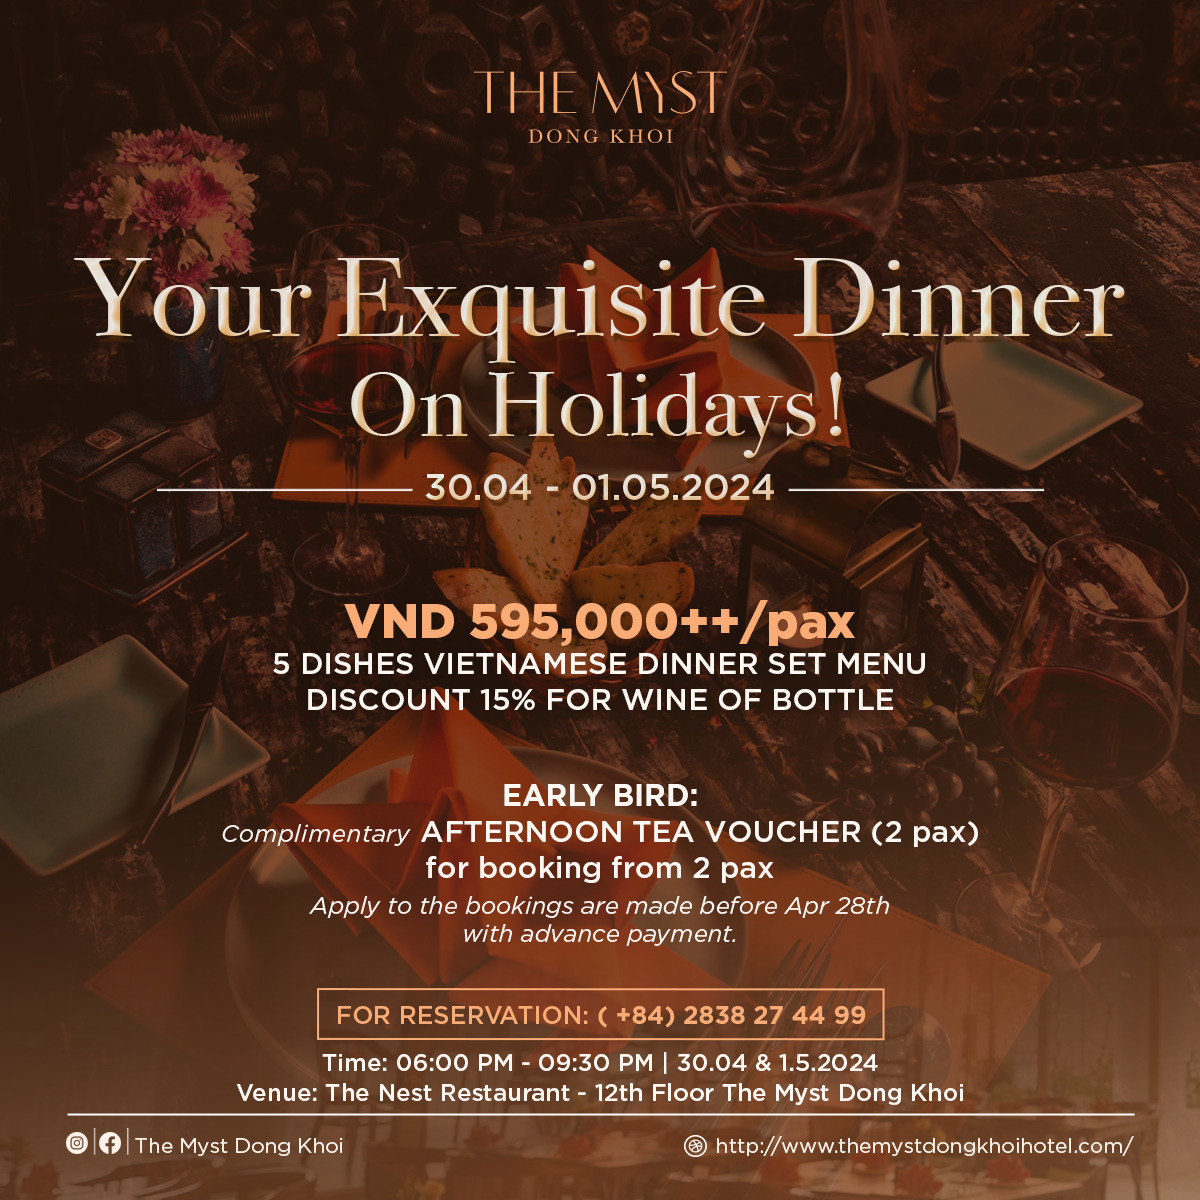 THE NEST RESTAURANT – Celabrate the Holiday with a Special Dinner